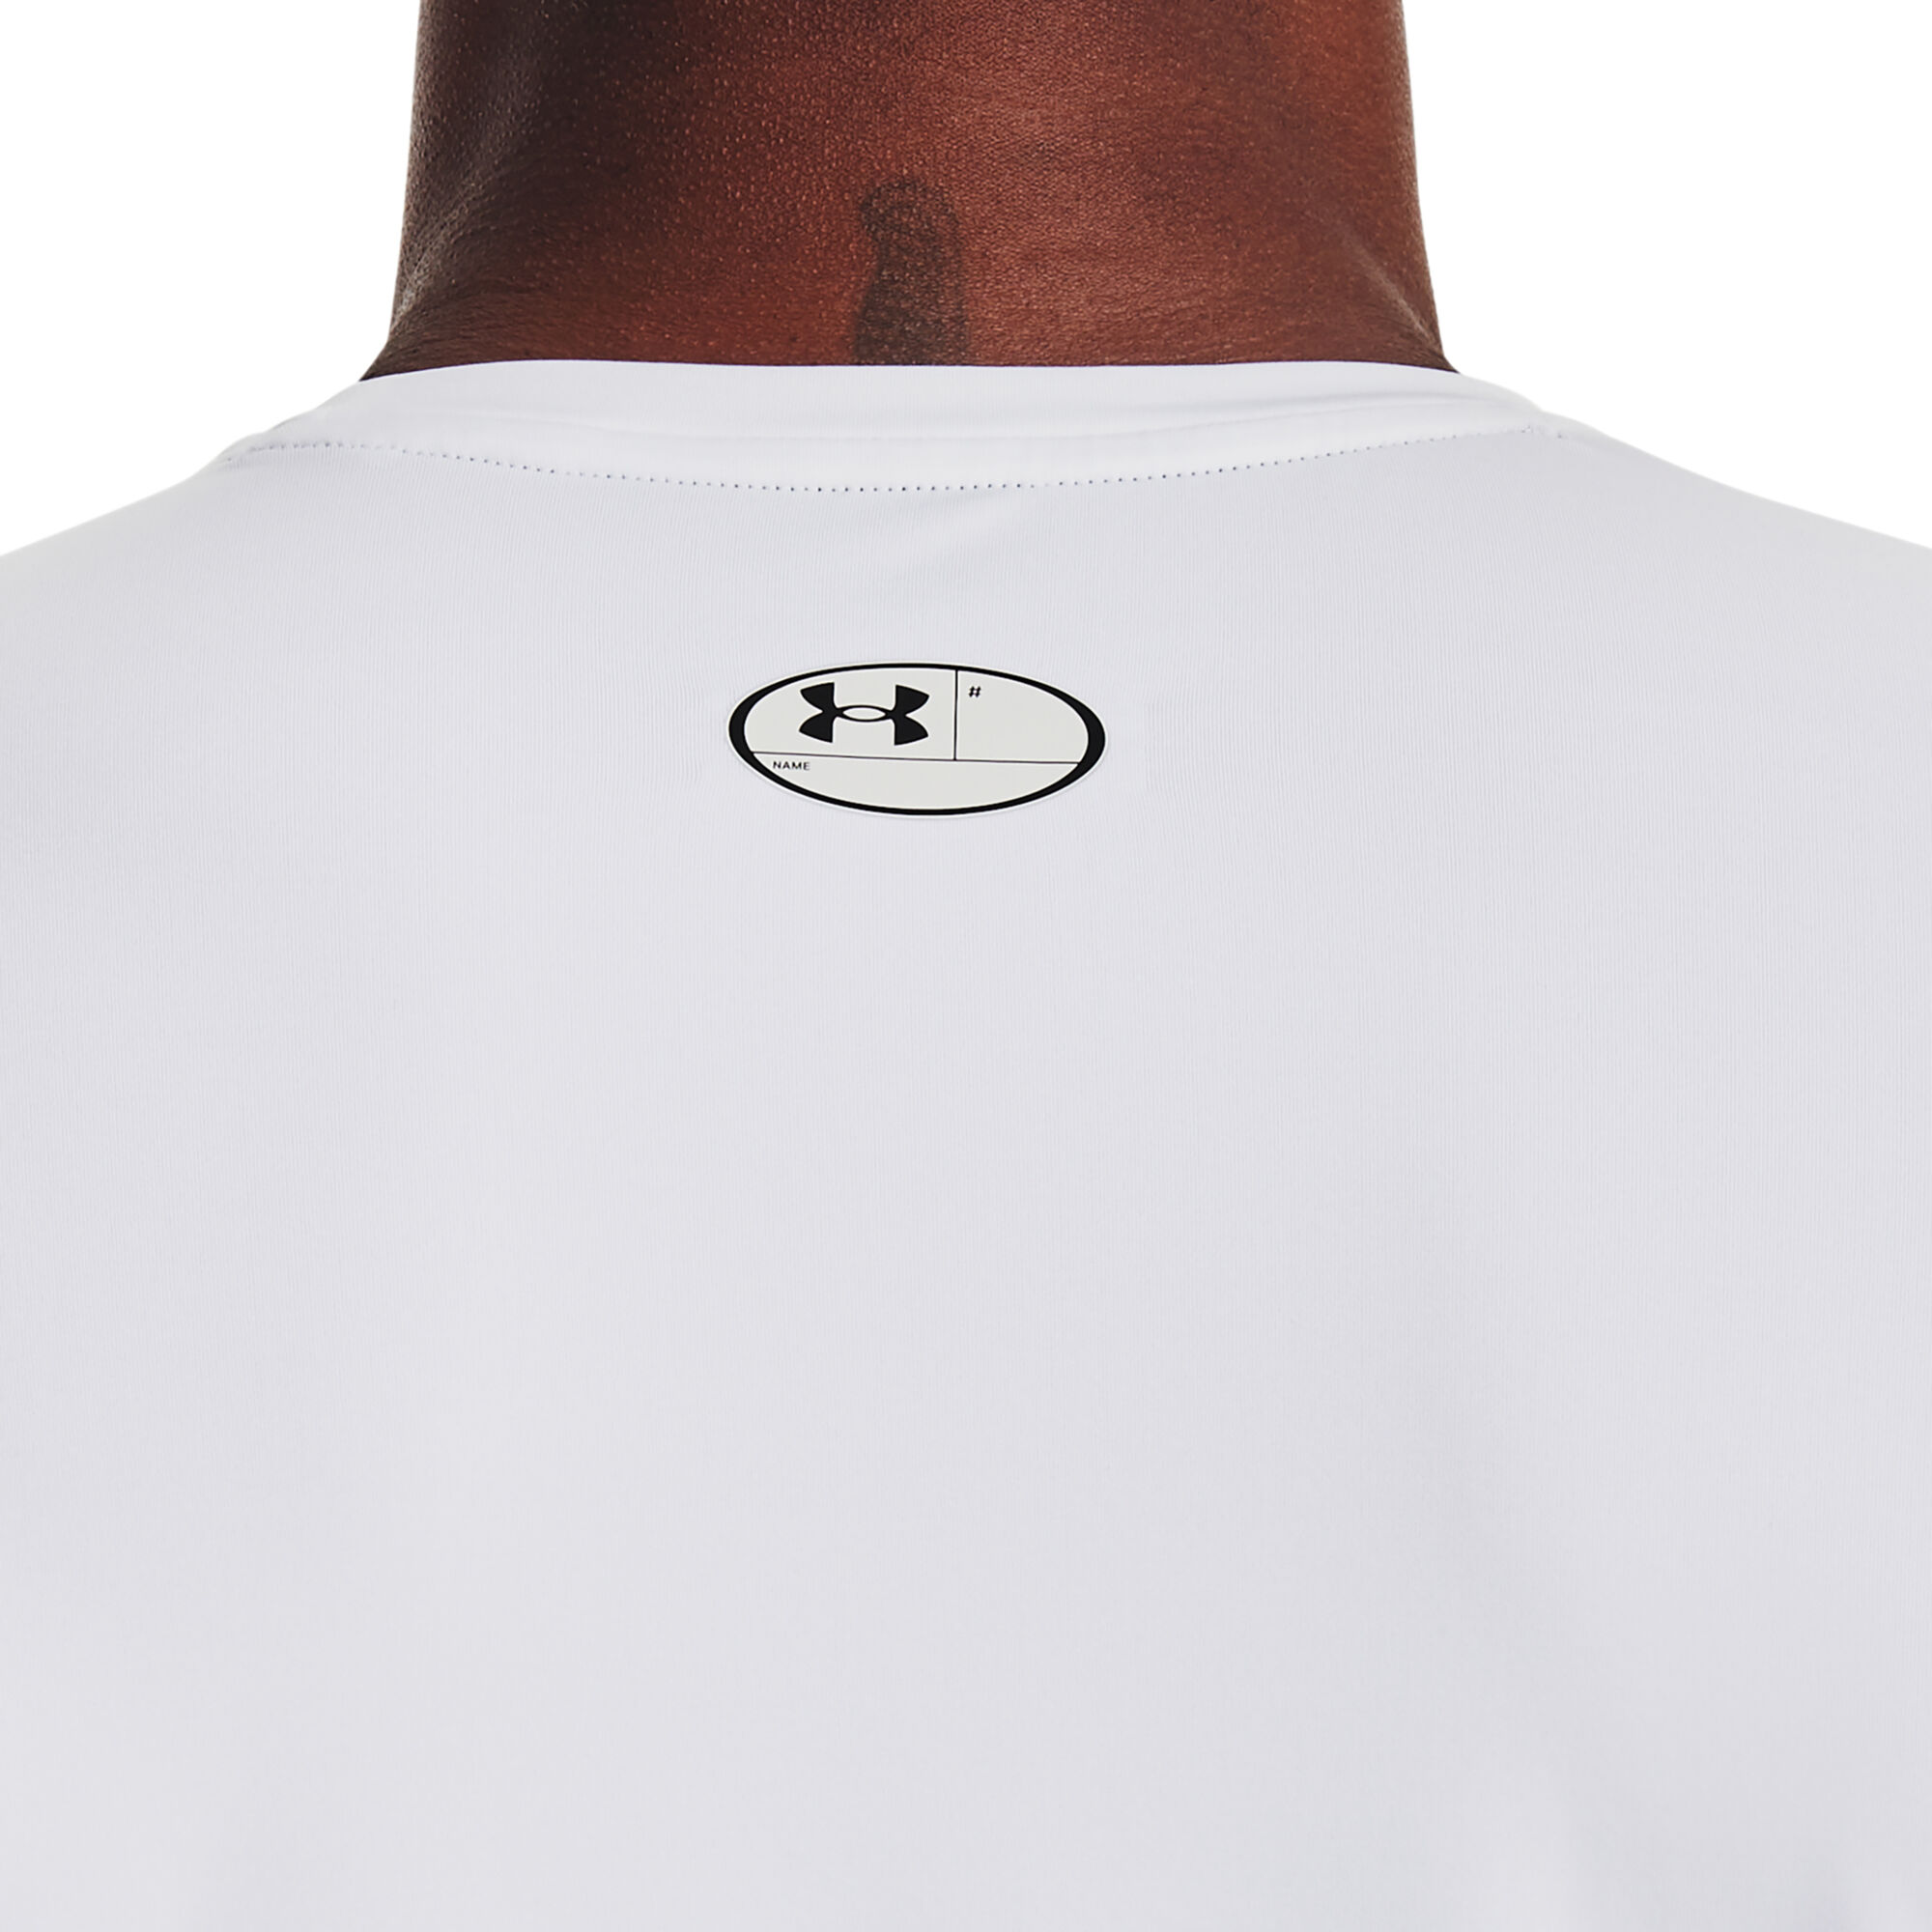 Under Armour HeatGear Armour Men's Fitted Tee